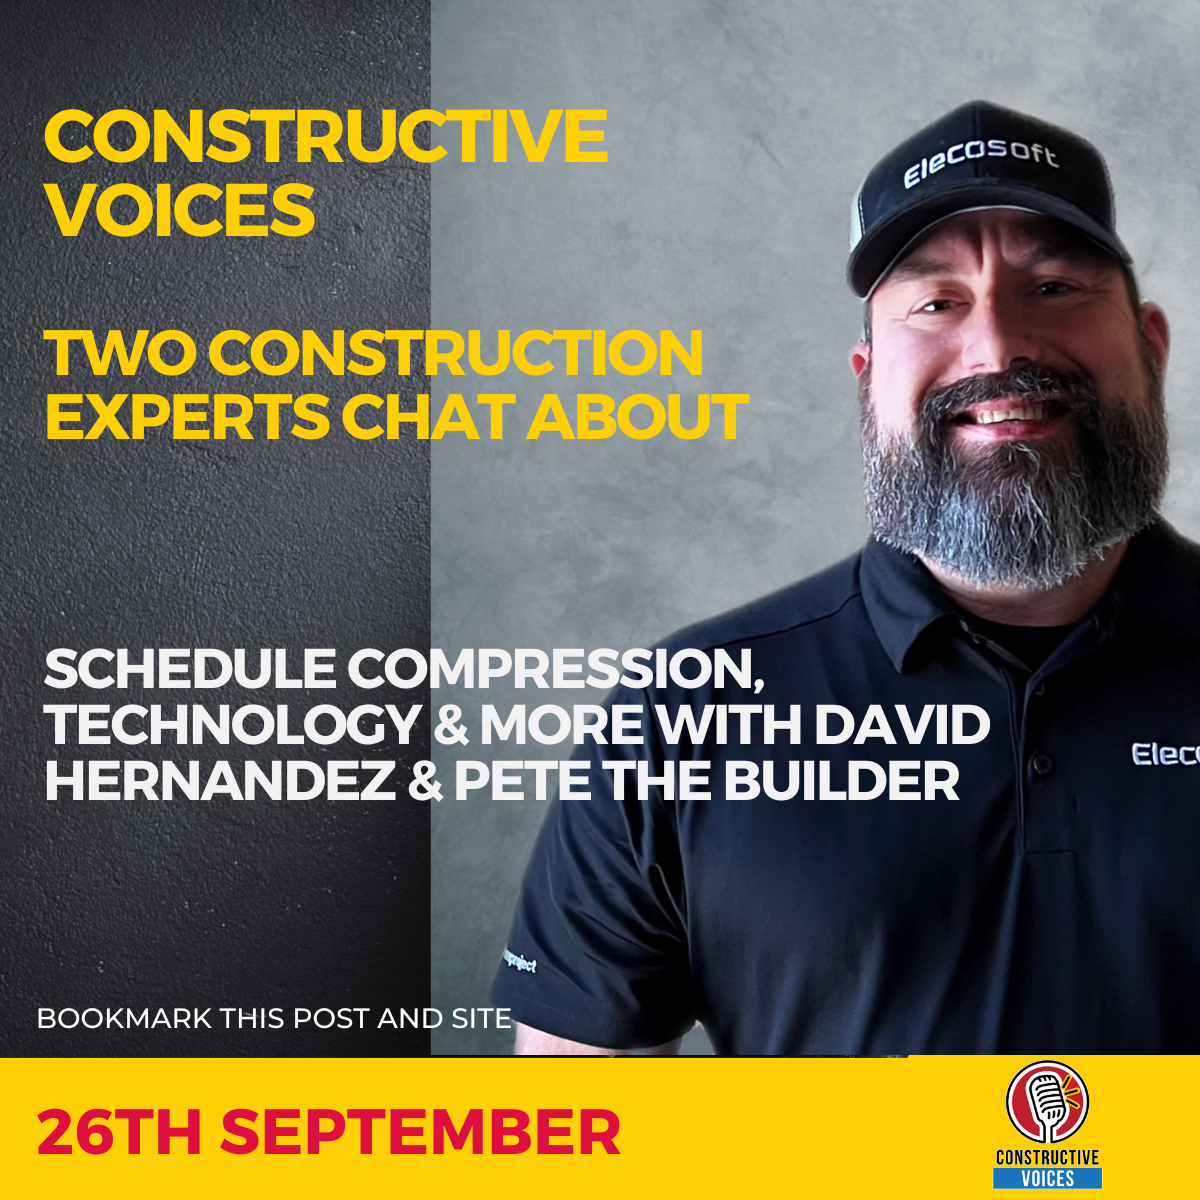 Schedule Compression, Technology & More With David Hernandez & Pete The Builder